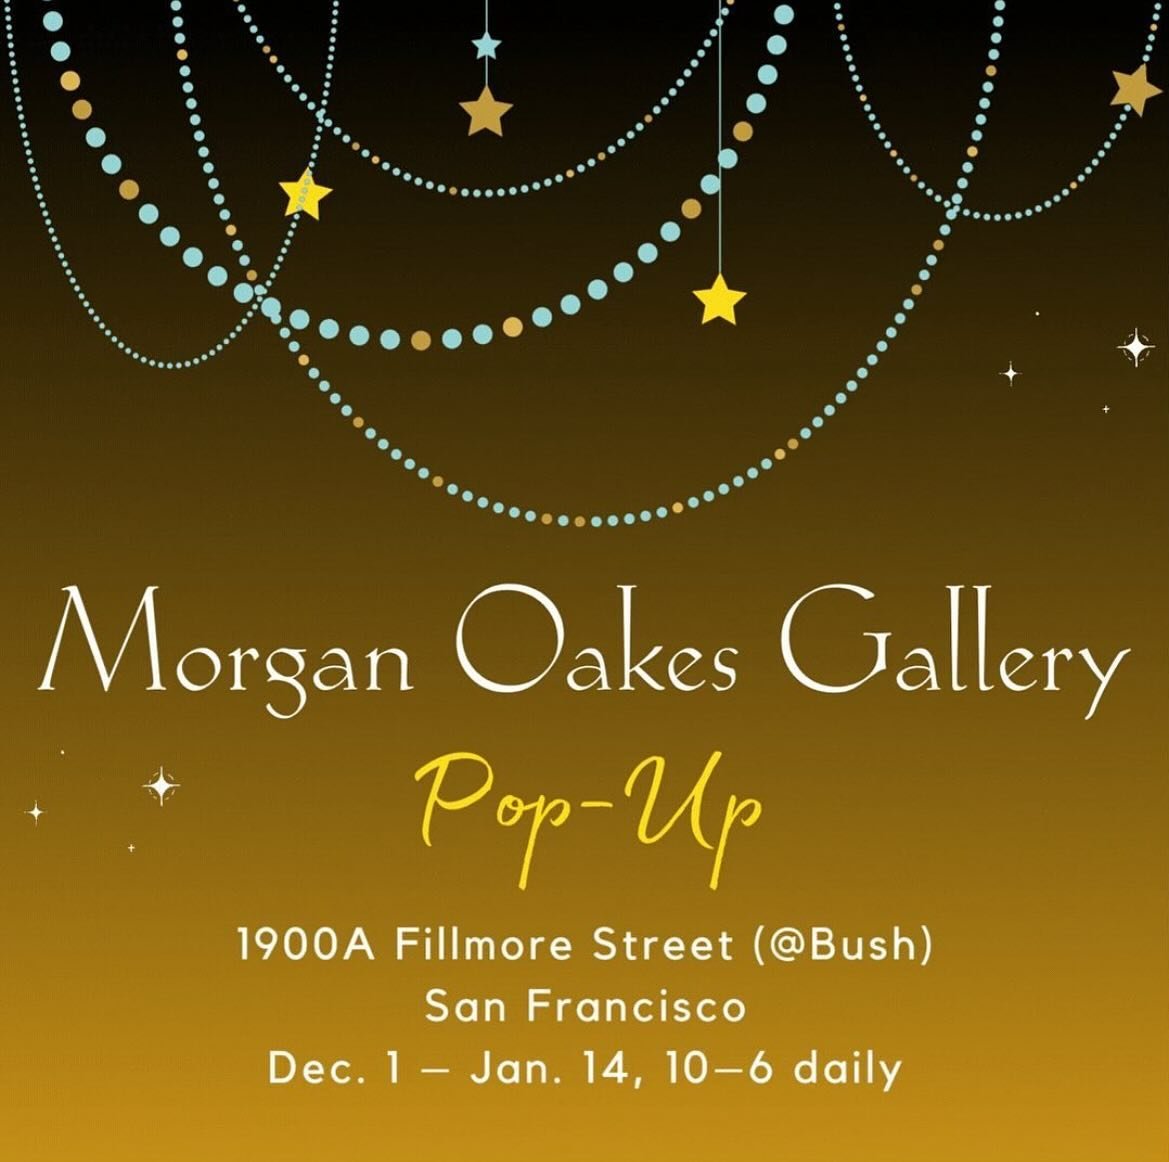 Visit us at our pop-up on Fillmore Street! For 6 weeks only, we have a jewel box filled with tribal art and mineral specimens. Look for the turquoise building just north of Bush Street. 1900A Fillmore Street in San Francisco. Dec. 1 - Jan. 14, 10 - 6